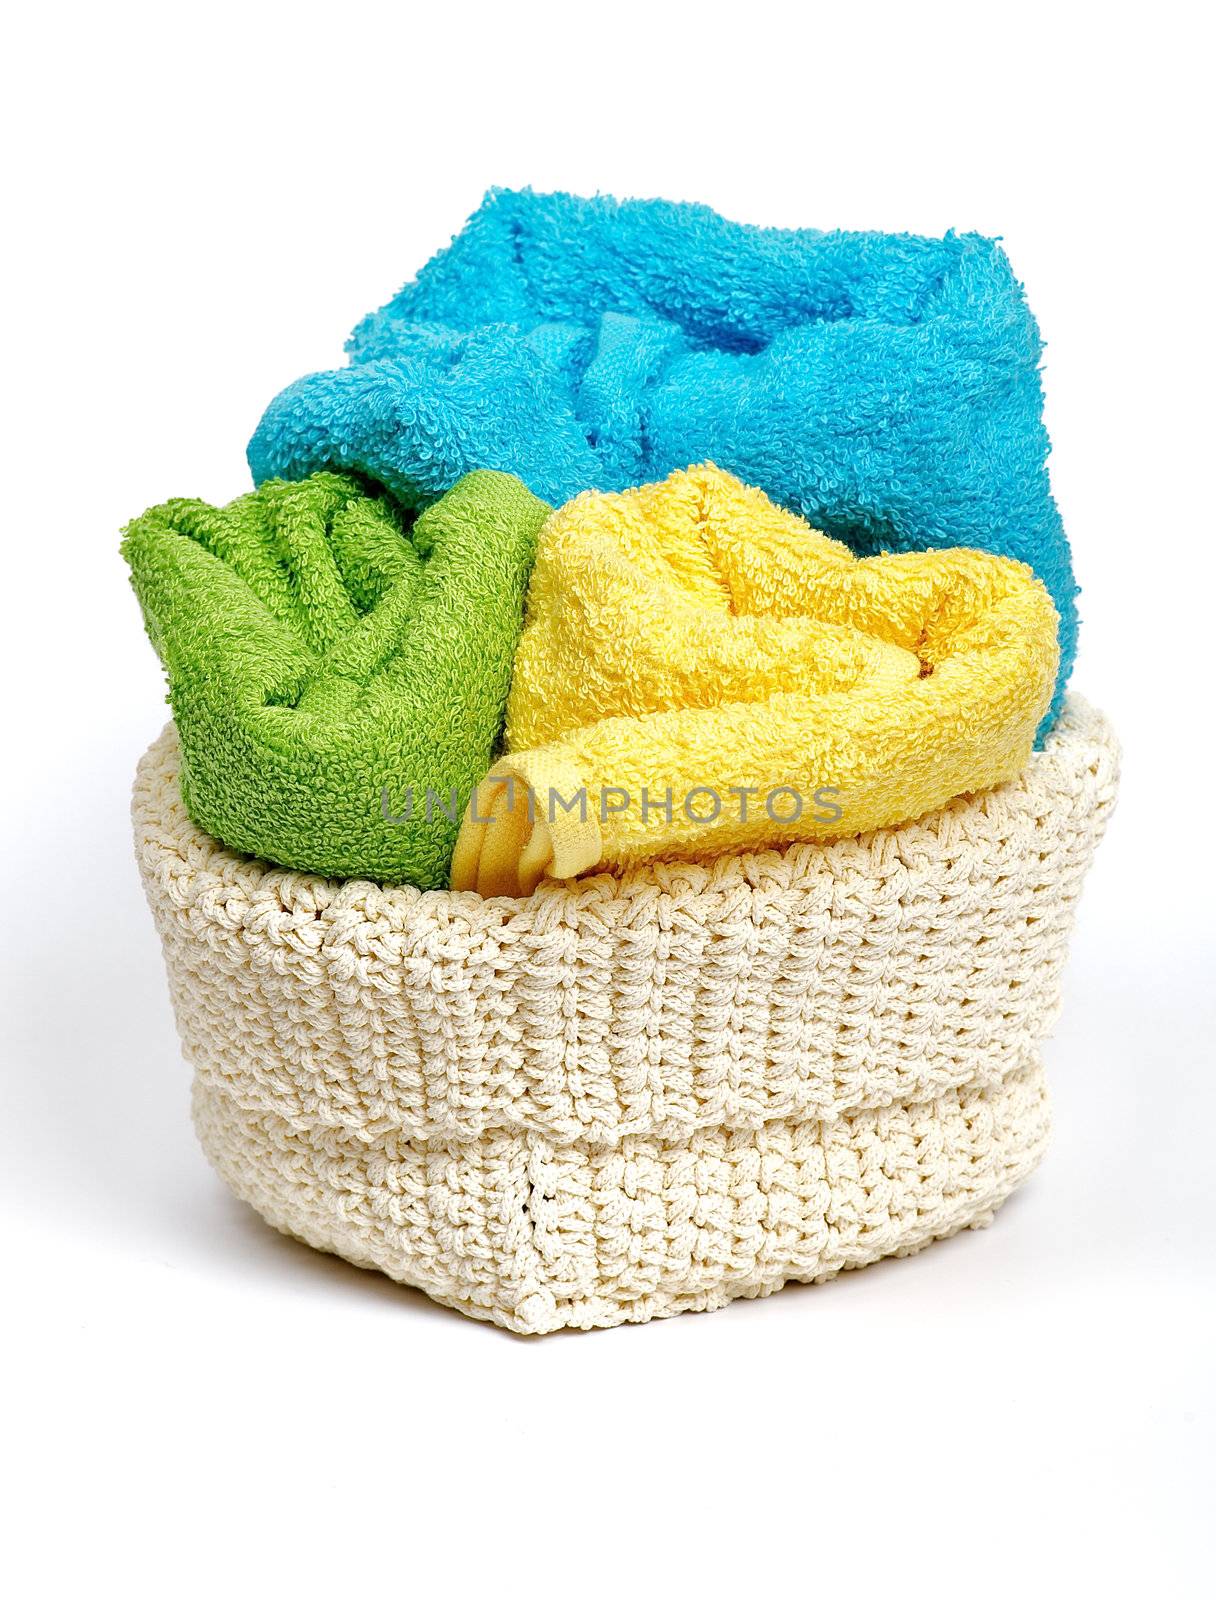 Multi-colored Terry towels in wattled container isolated on white background